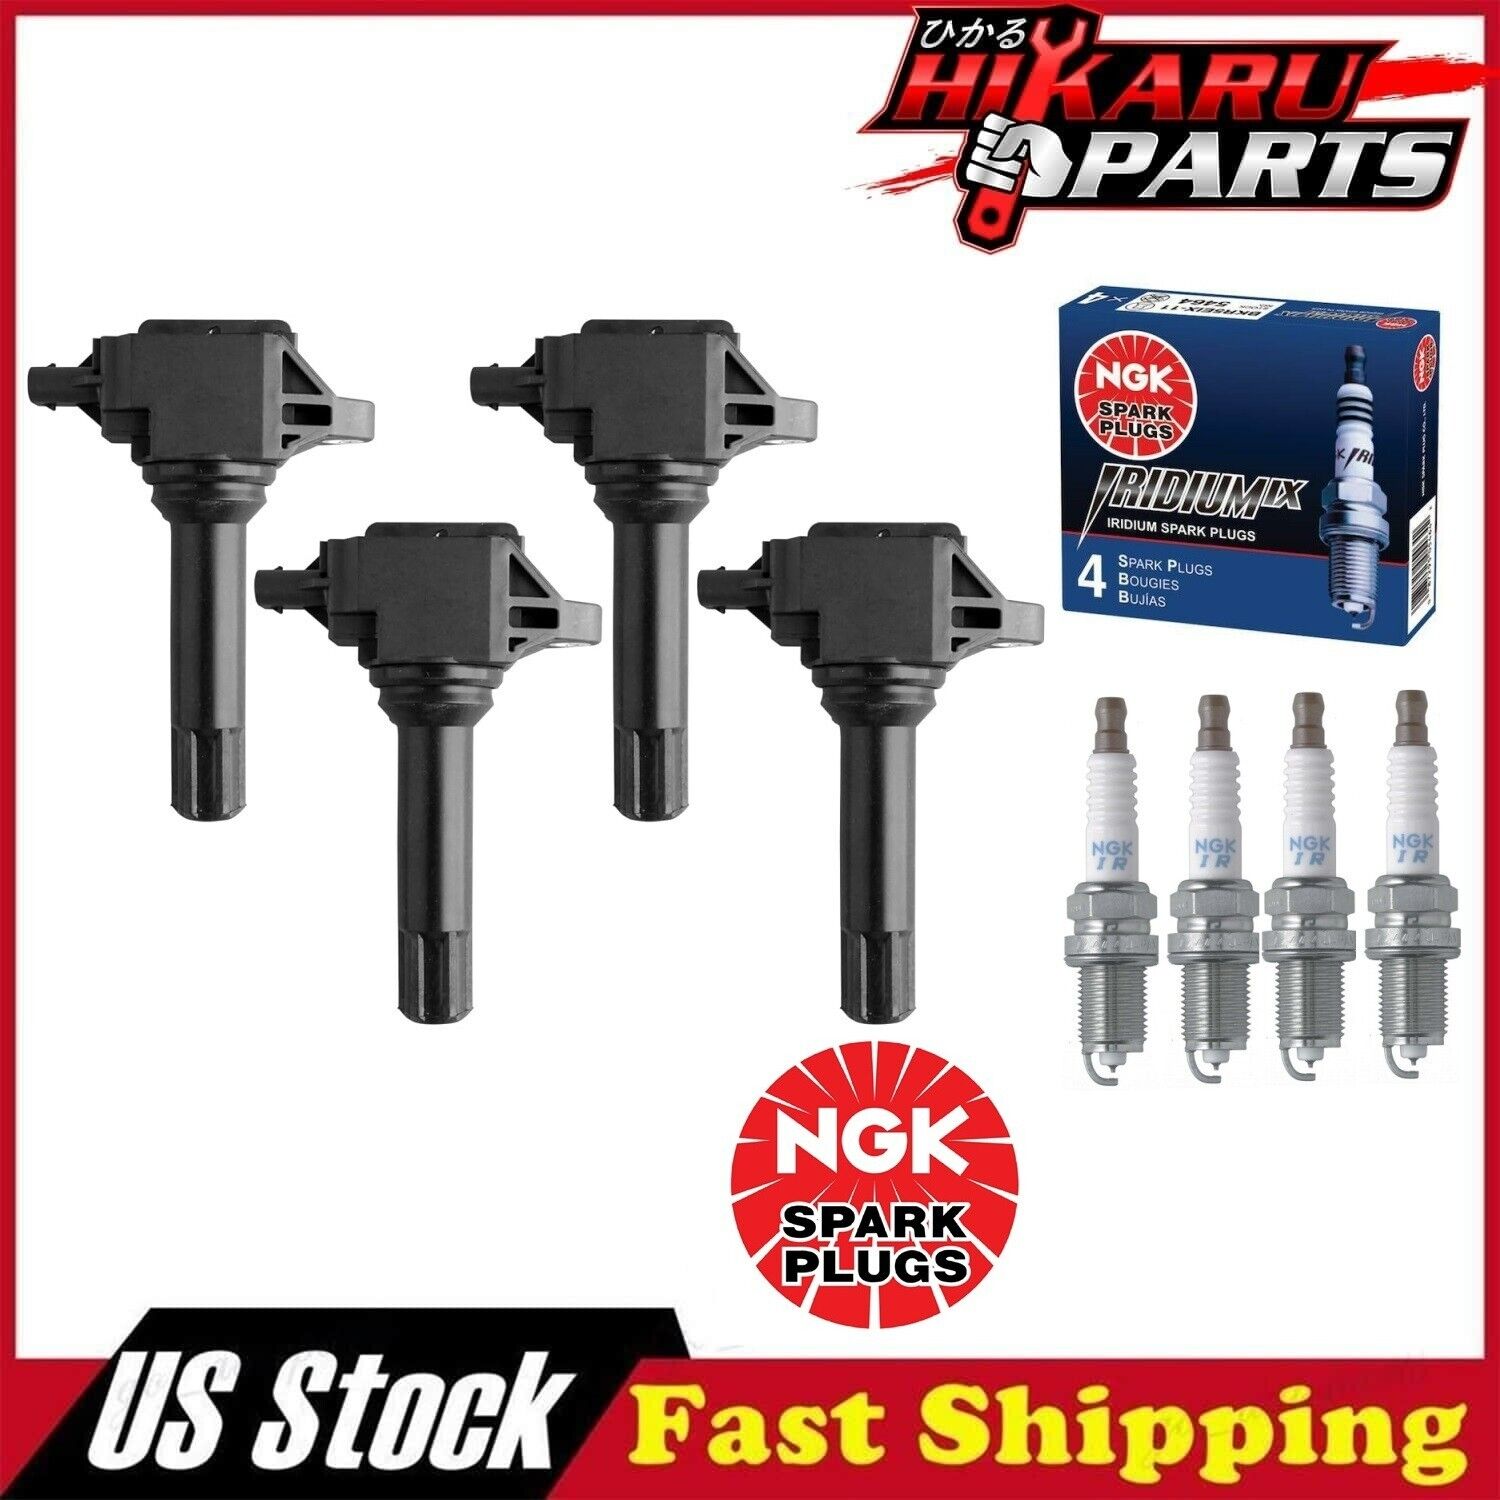 4x NGK Spark Plug & 4x Ignition Coil For Subaru Legacy Forester Outback 2.5L H4